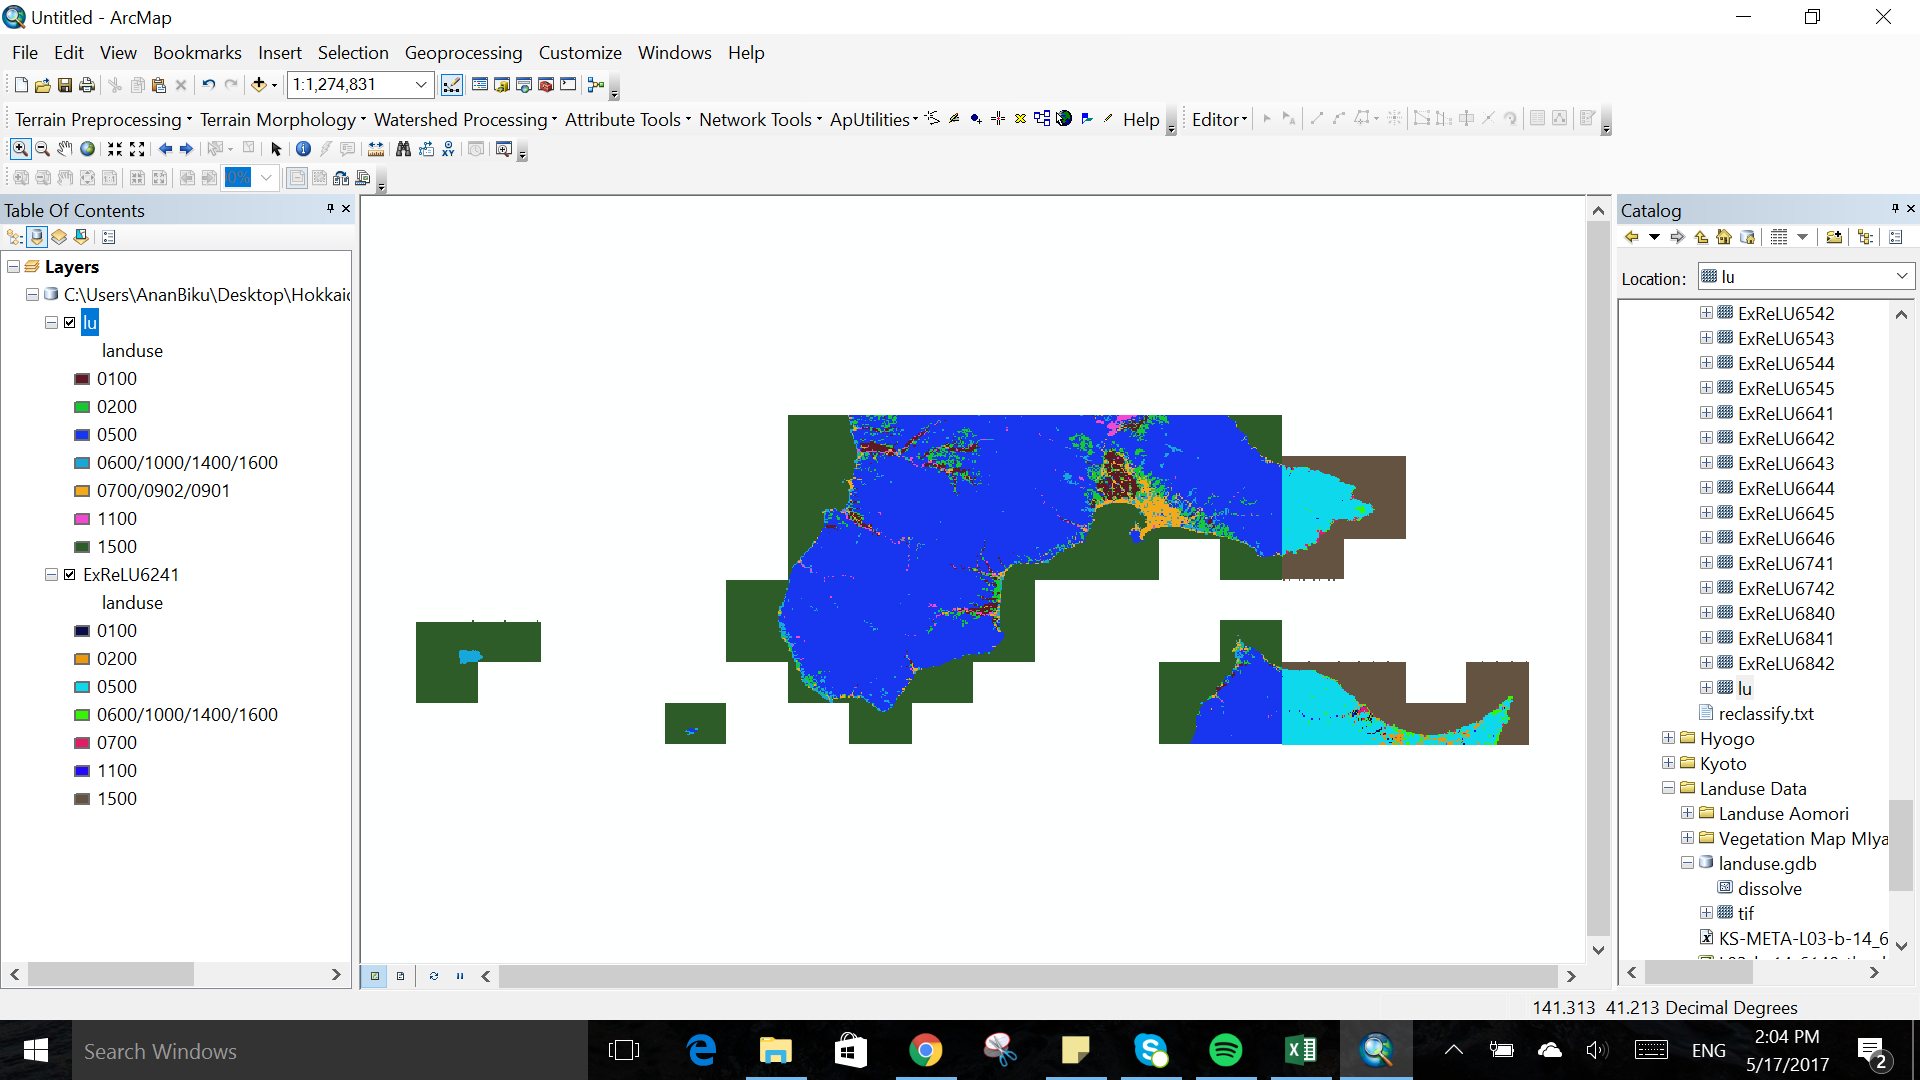 As you can see here, the dark blue map shows two files merging despite the differences in values (one had 7; other had 6)